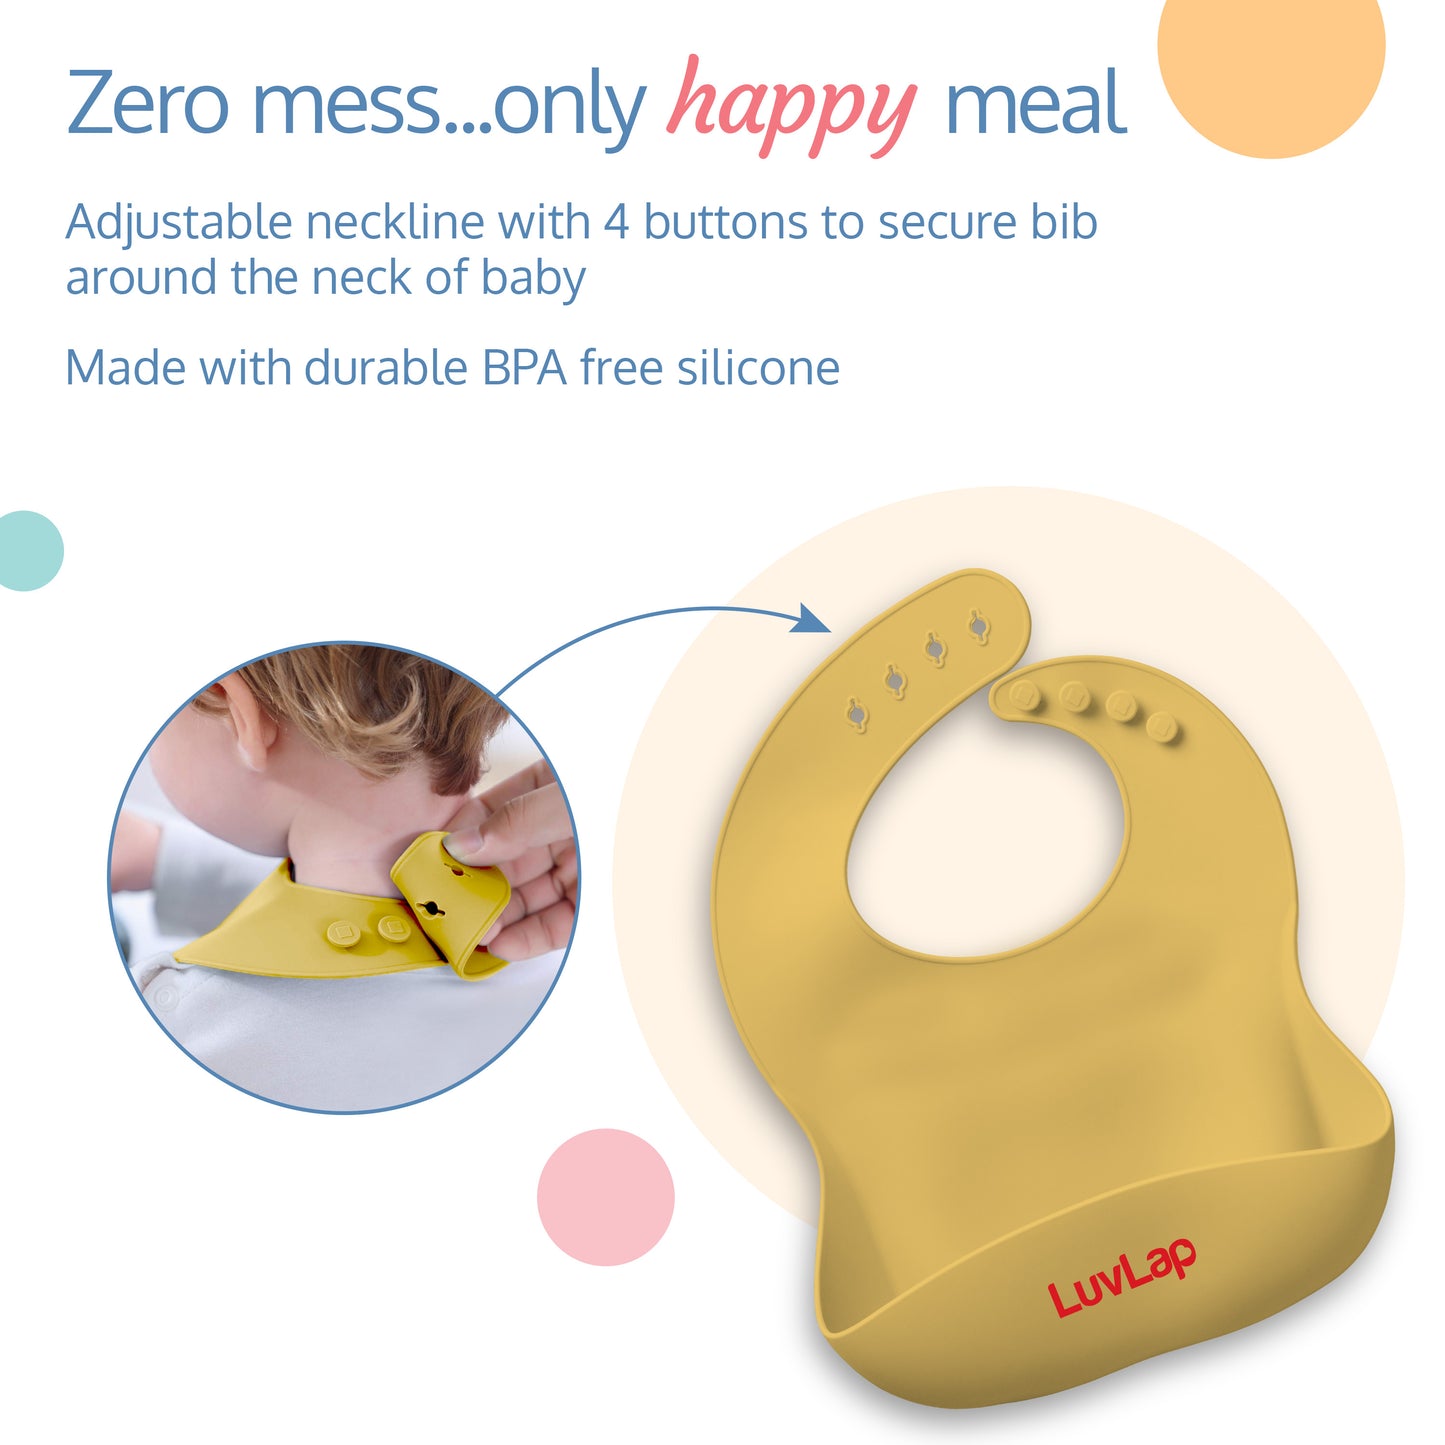 5 - in - 1 Silicone Baby Cutlery Set, Baby Feeding & weansing essentials - Divider Plate with suction base, Tumbler, Bib with crumb catcher, Food Bowl with suction base, Silicone Spoon ( Yellow )